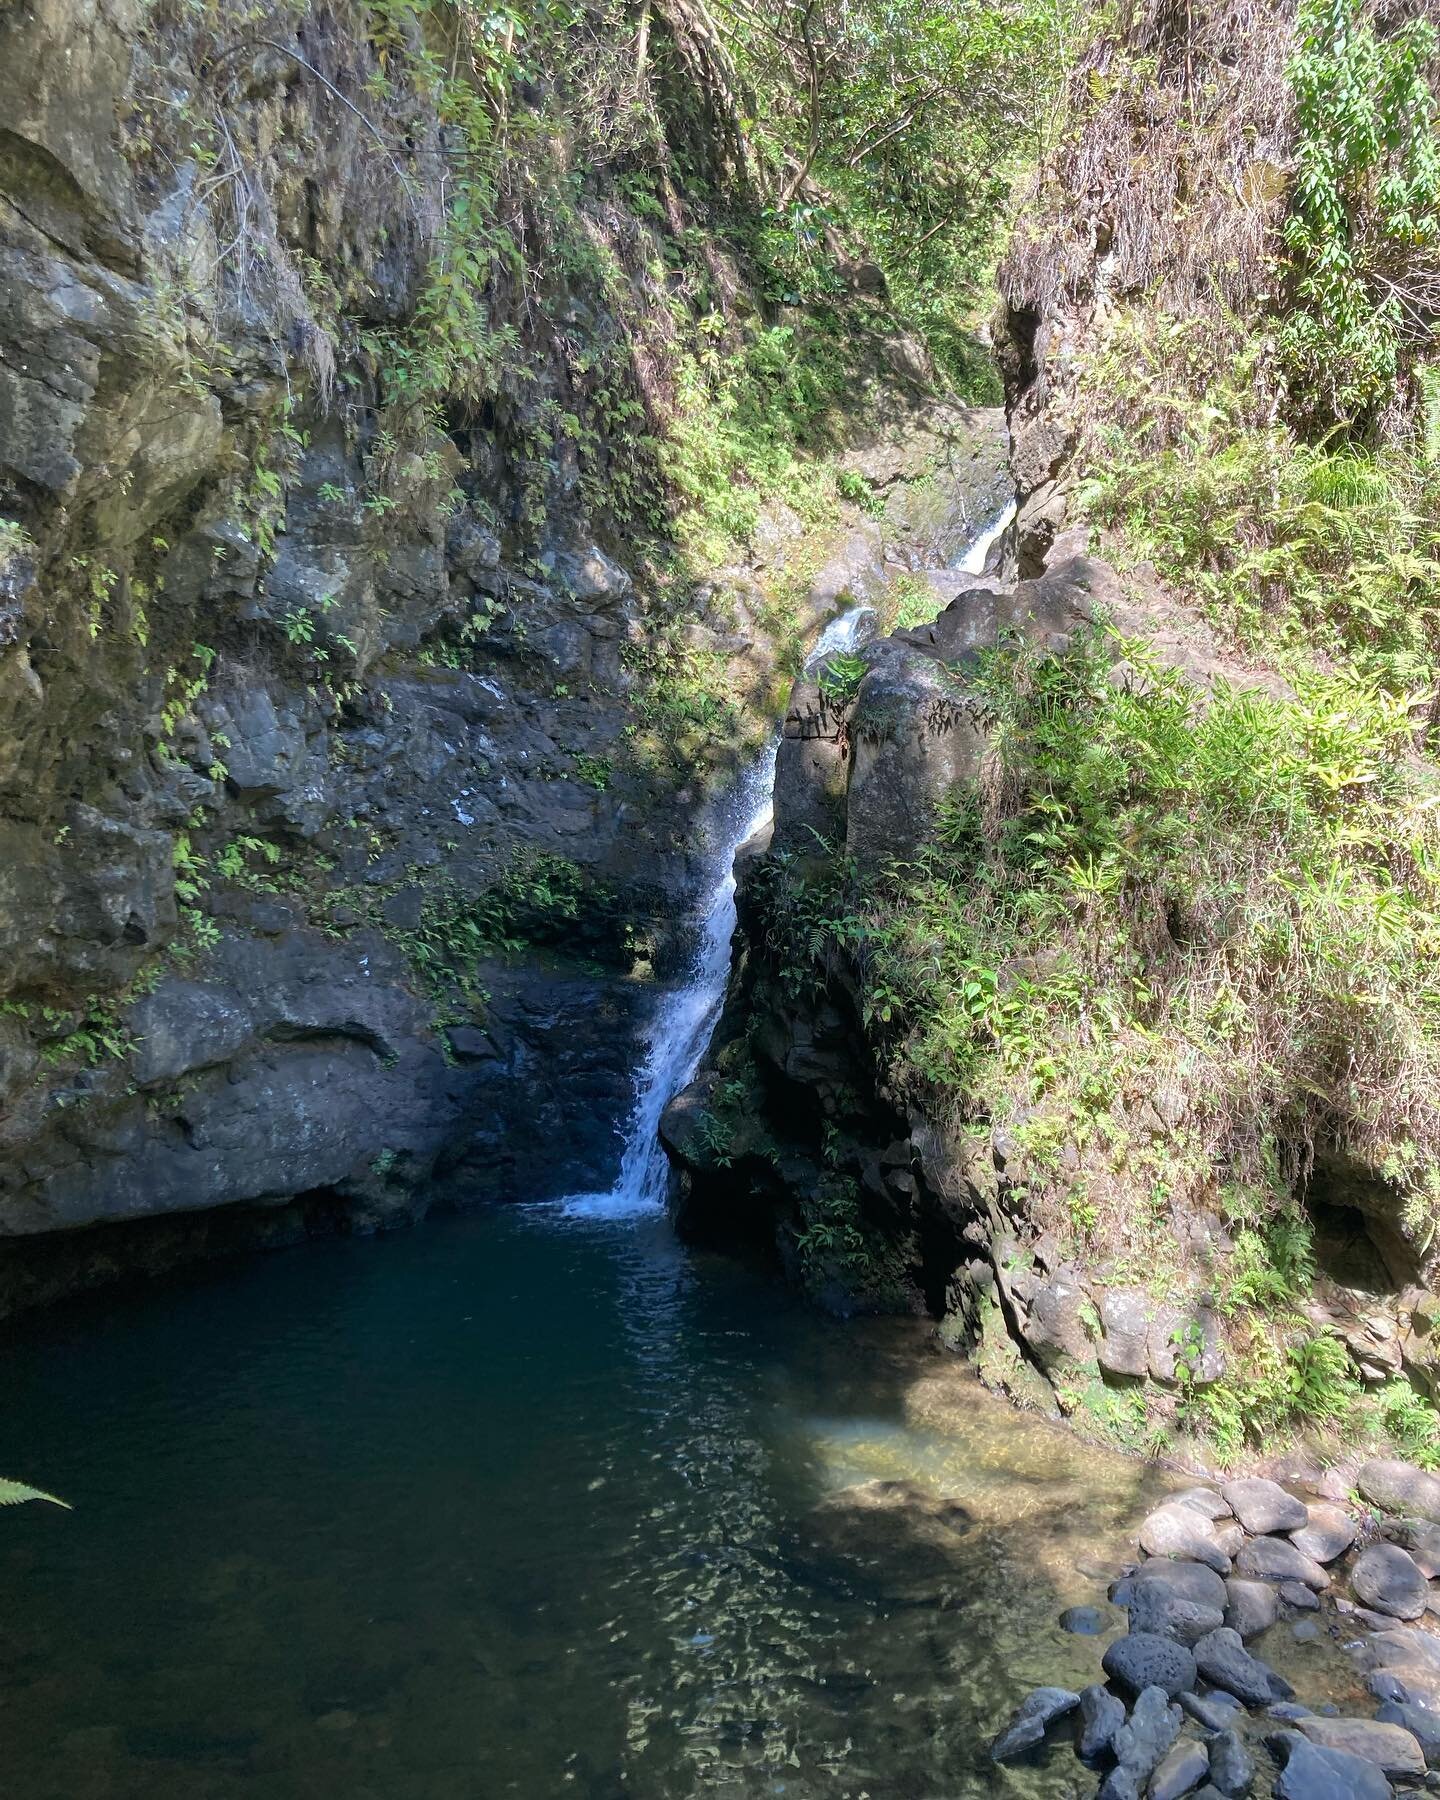 What we do on our day off! Hiking and having a fun time. 

#hiking #maui #mauifishnchips #familyowned #waterfalls #adventure #cometryit #hawaii #beautiful